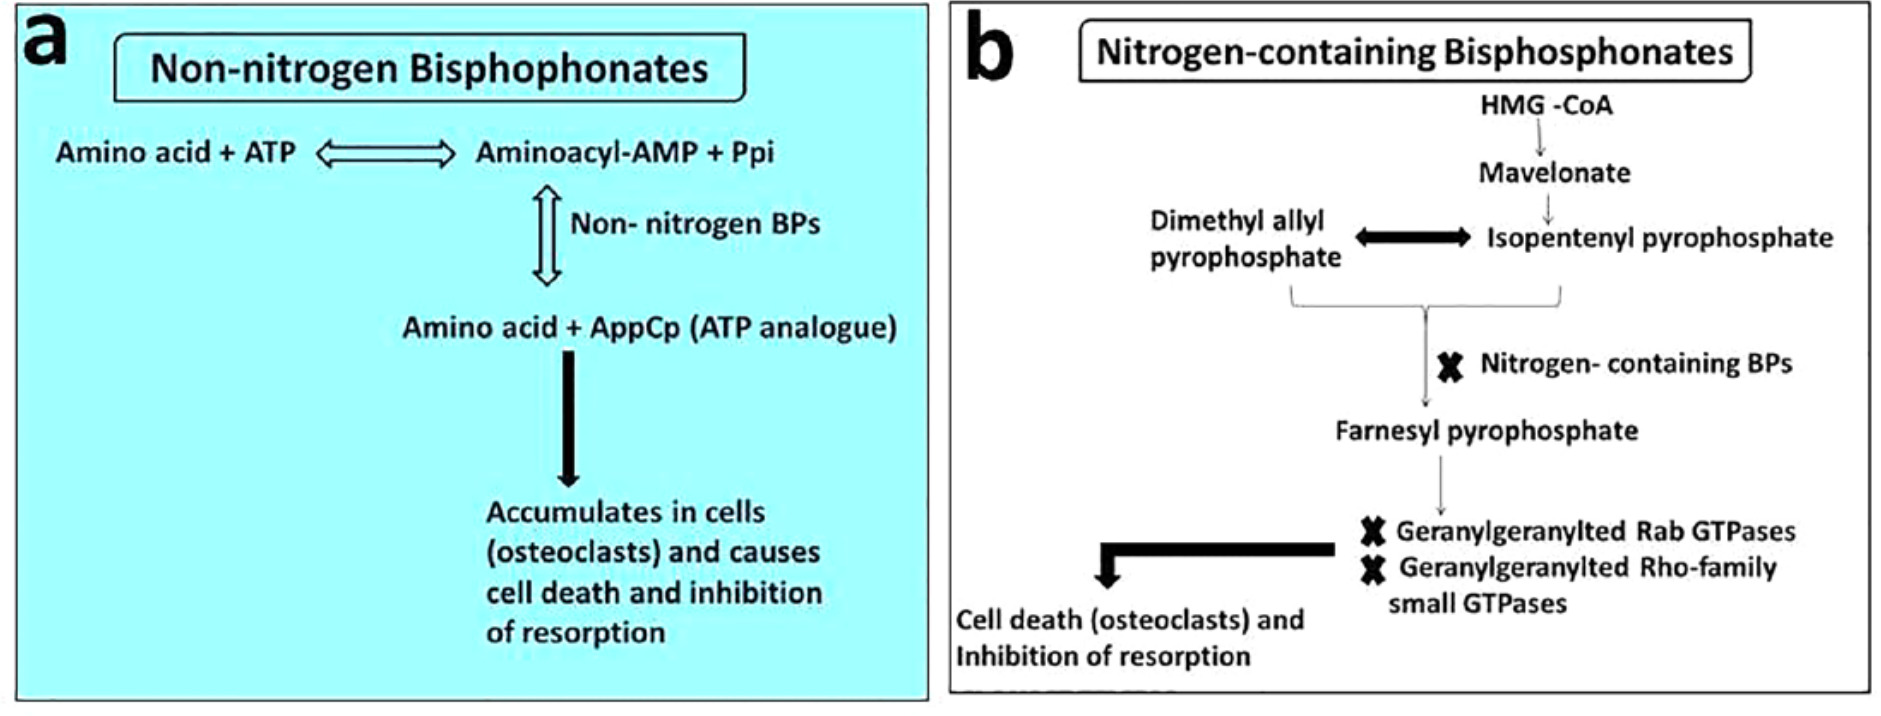 Fig. 1 
          Figure showing the representation of cellular mechanism of action of a) non-nitrogen and b) nitrogen containing bisphosphonates. Reproduced from Rogers M, Frith J, Luckman S, et al. Molecular mechanisms of action of bisphosphonates. Bone 1999;24:73S-9S (with permission from Elsevier) and Roelofs AJ, Thompson K, Gordon S, Rogers MJ. Molecular mechanisms of action of bisphosphonates: current status. Clin Cancer Res 2006;12(20 Pt 2):6222s–6230s.
        